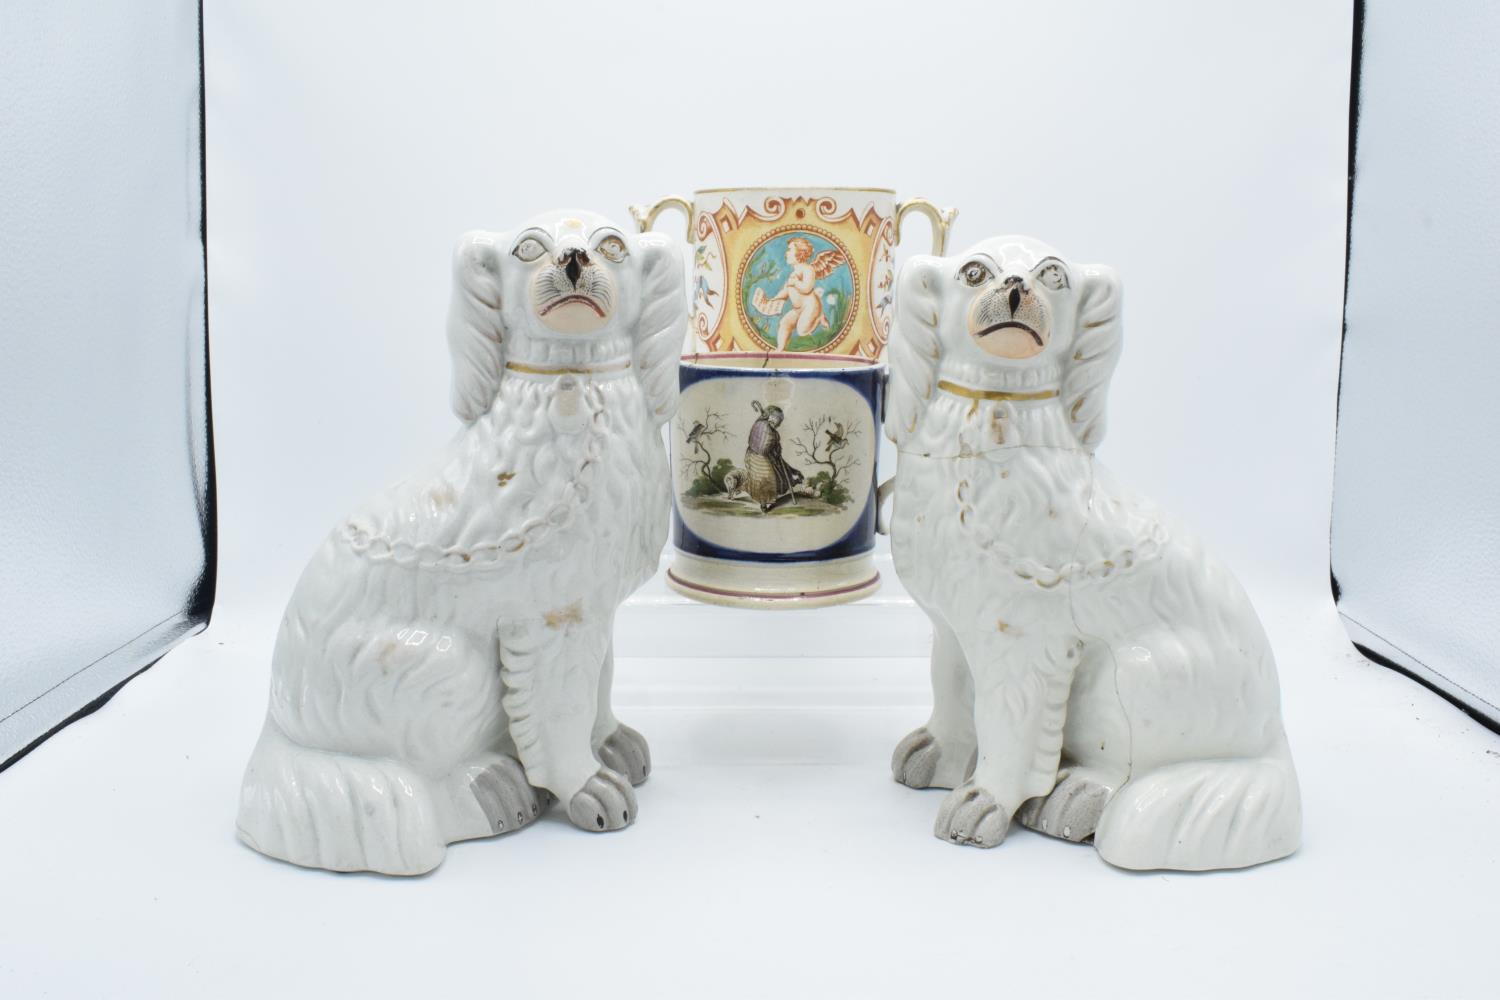 19th century Staffordshire pottery to include a pair of dogs, a shepherd mug and a 2 handled